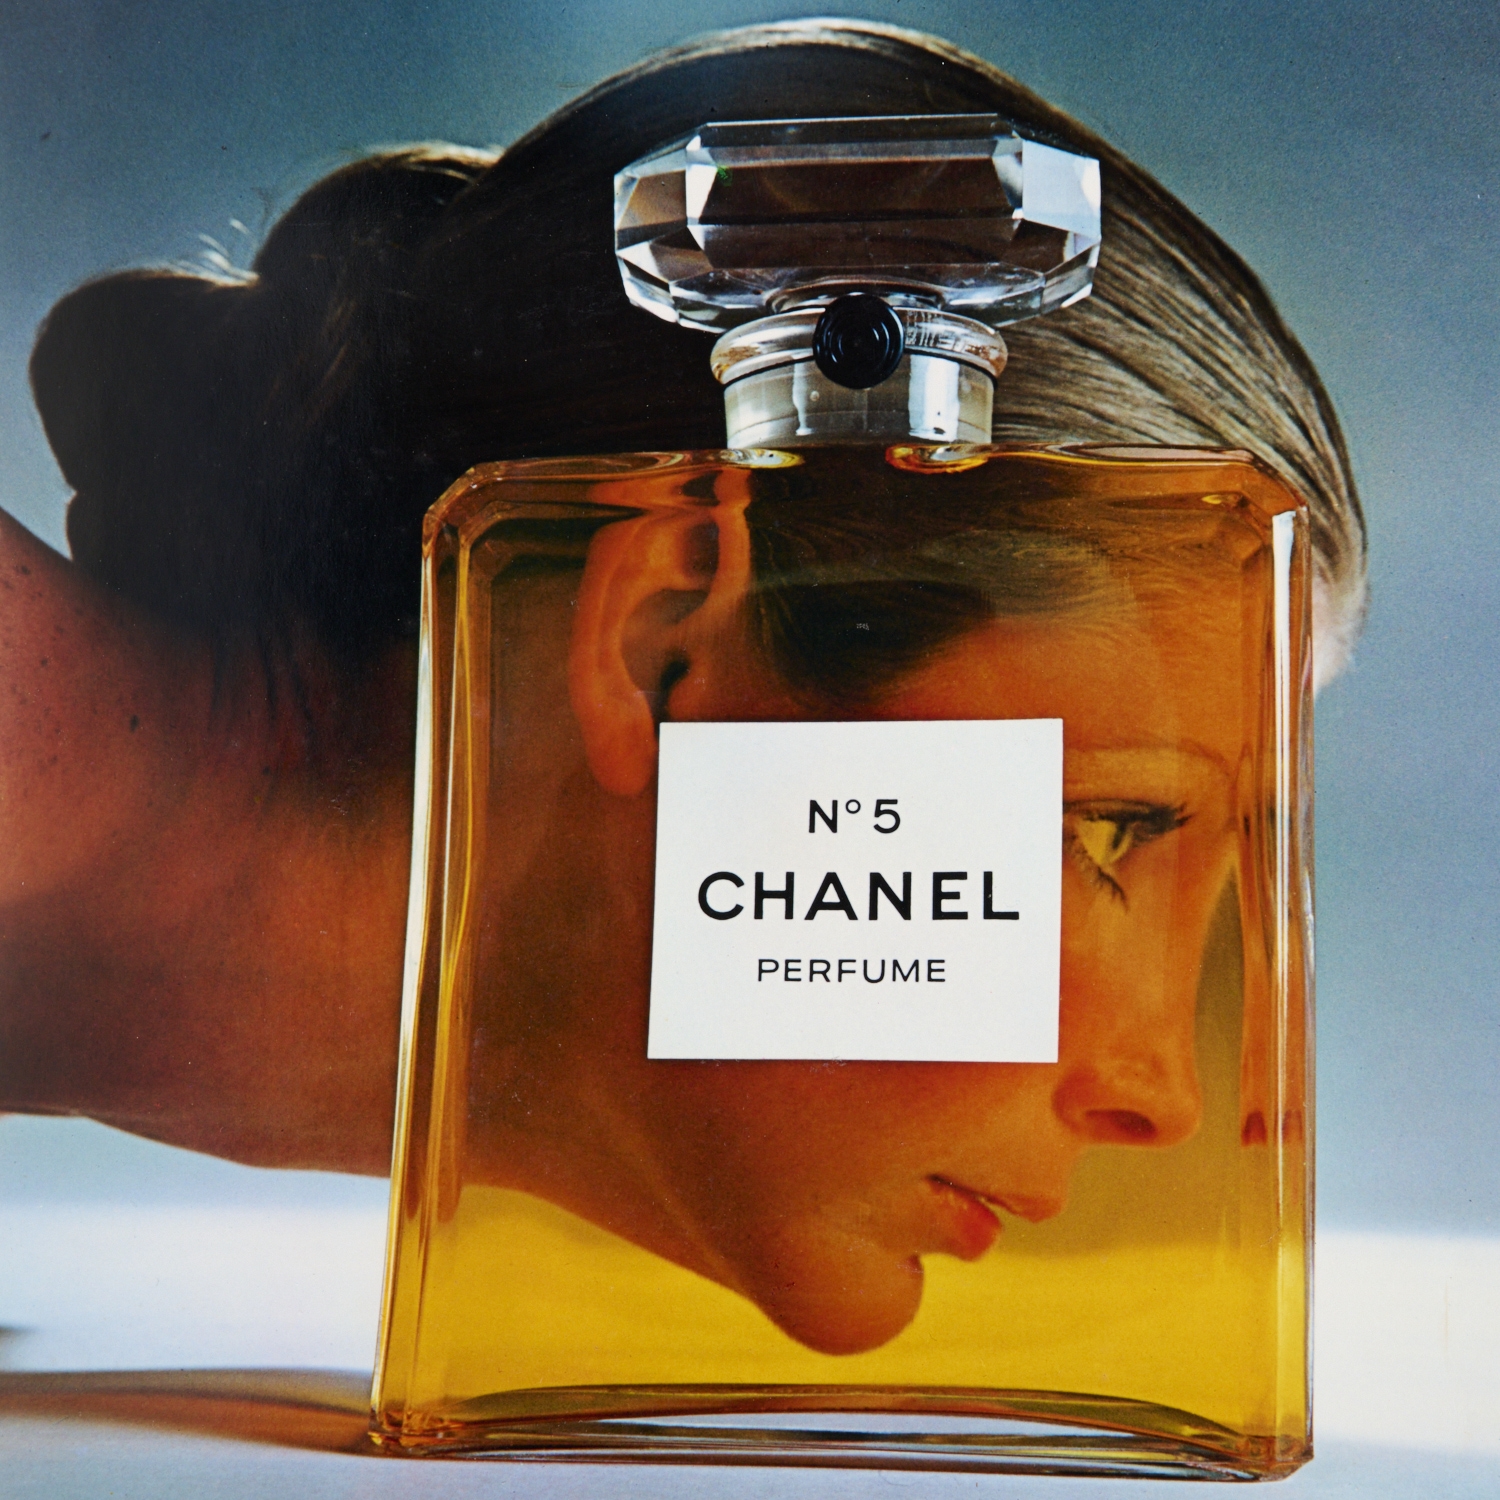 Original Vintage Chanel No. 5 Poster by Andy Warhol 1997 – The Ross Art  Group